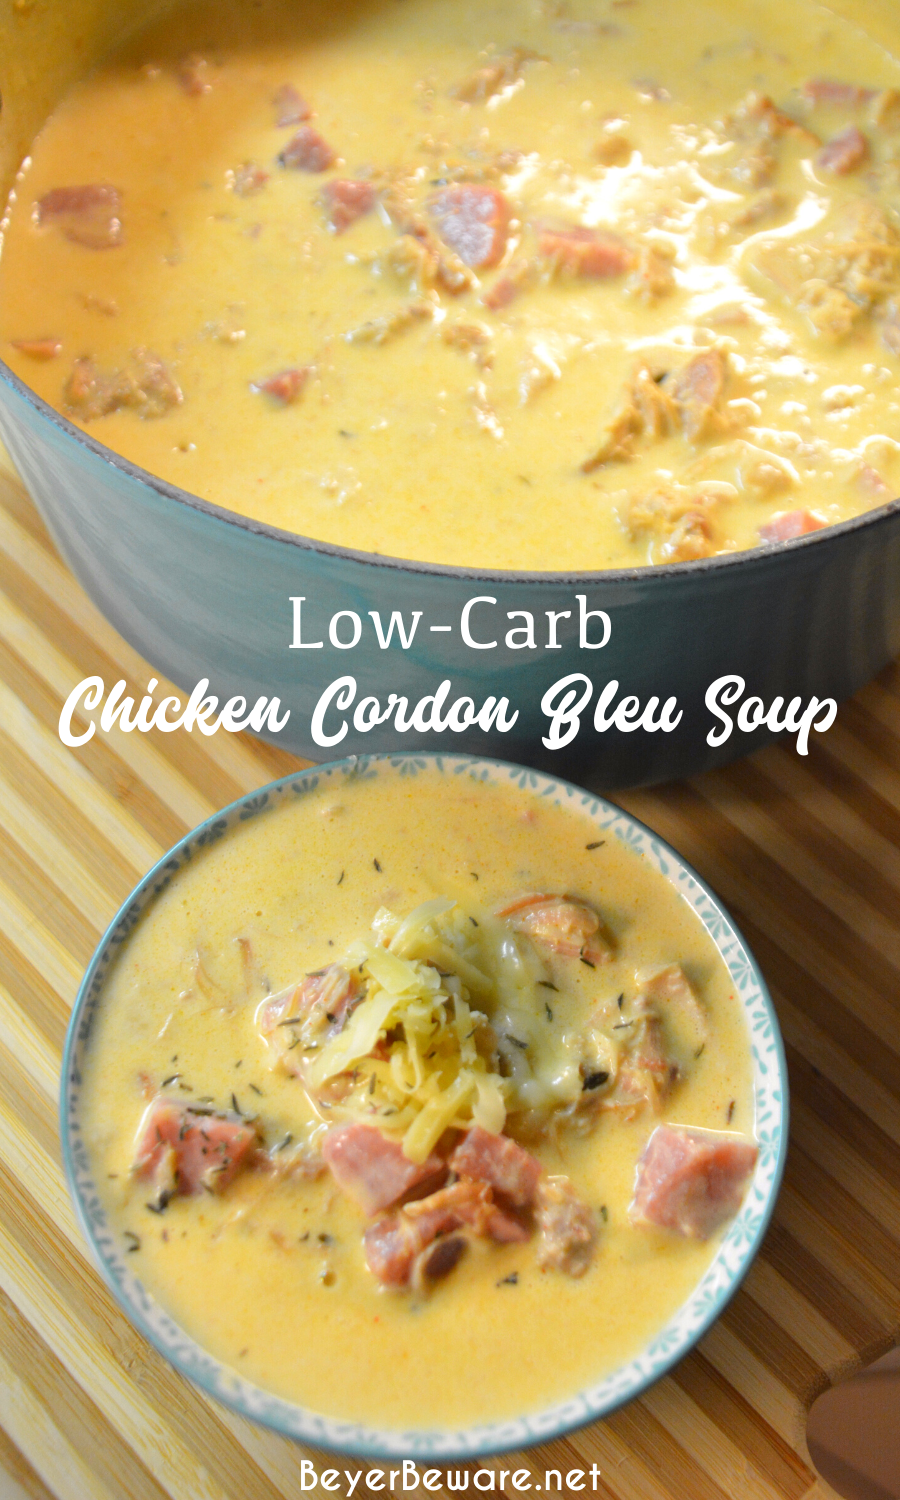 Low-Carb chicken cordon bleu soup combines shredded chicken with cream cheese, herbs and spices and broth to make this rich and creamy keto soup.